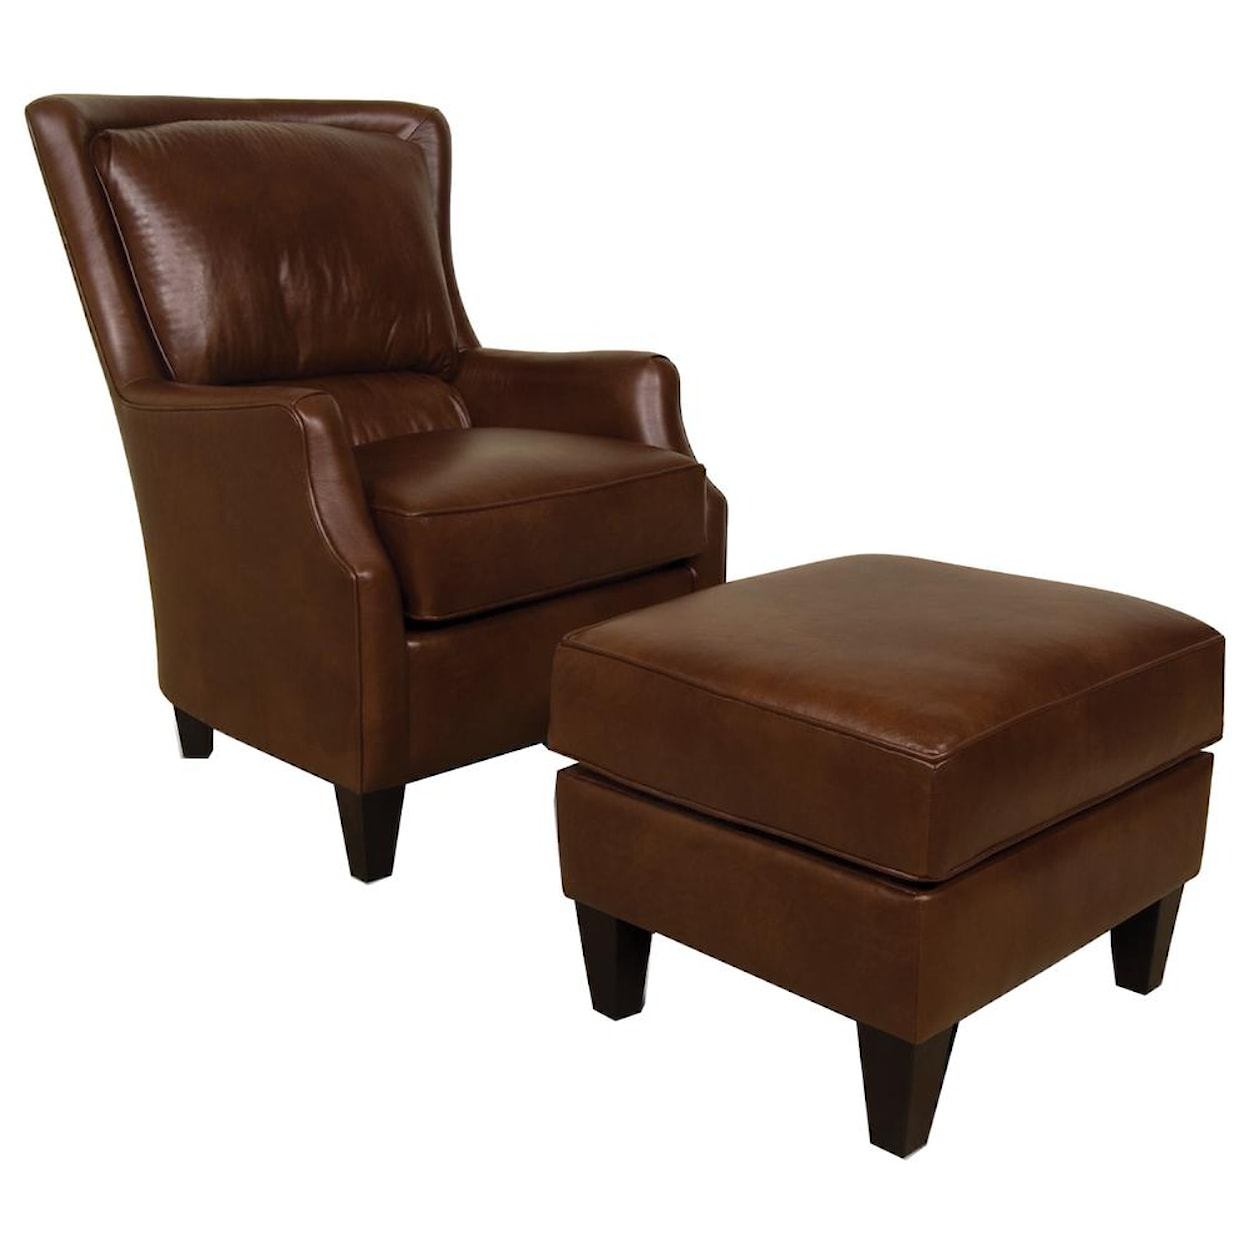 England 2910/AL Series Upholstered Club Chair and Ottoman